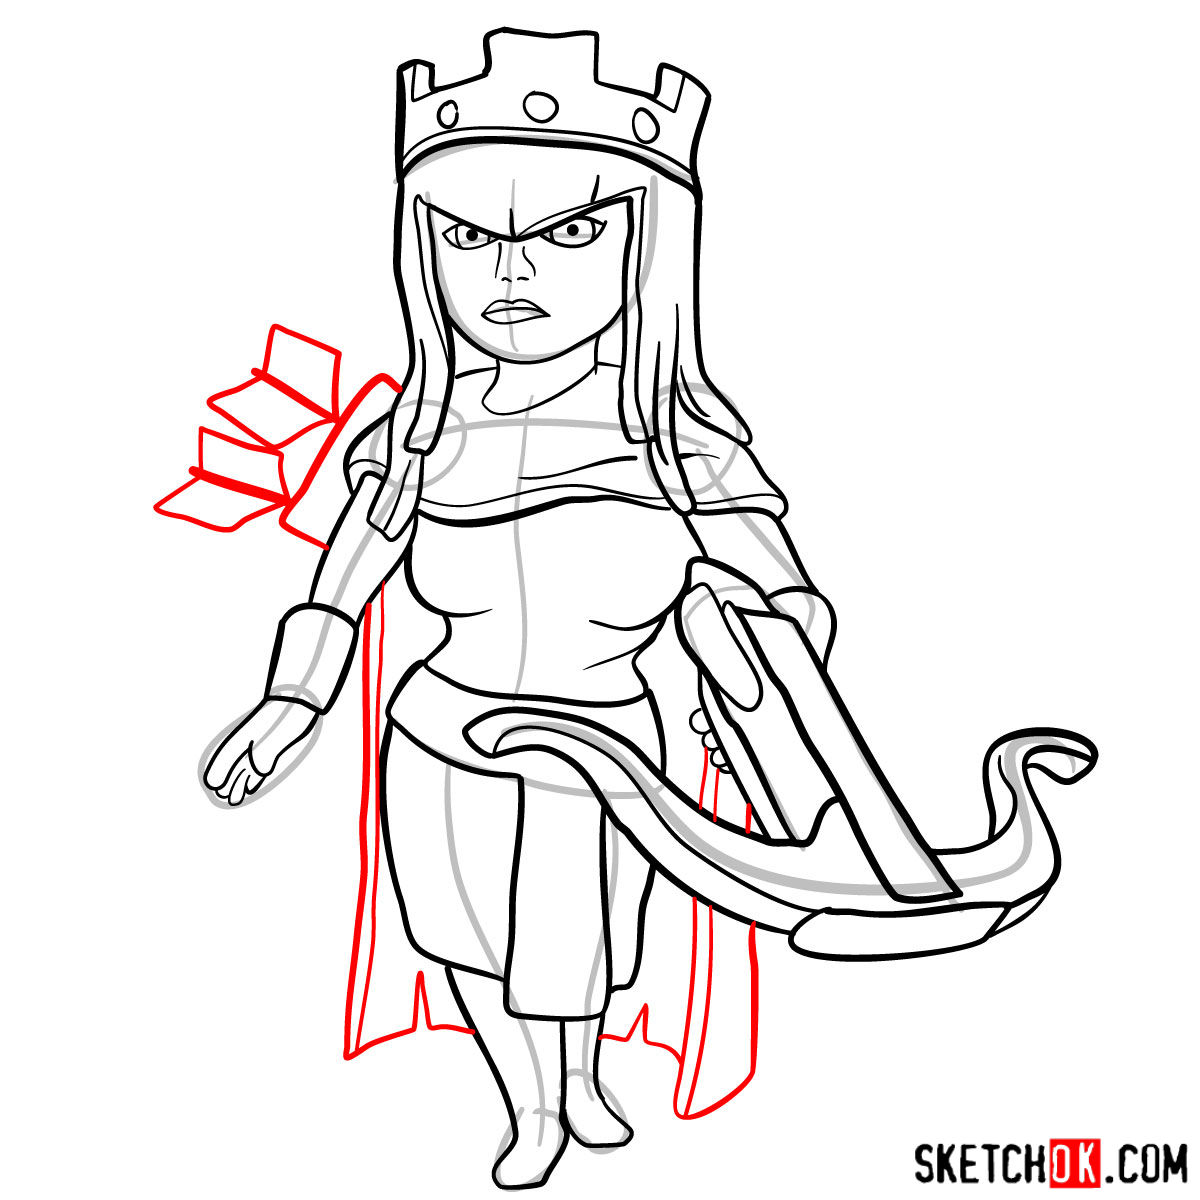 How to draw Archer Queen from Clash of Clans game - step 13